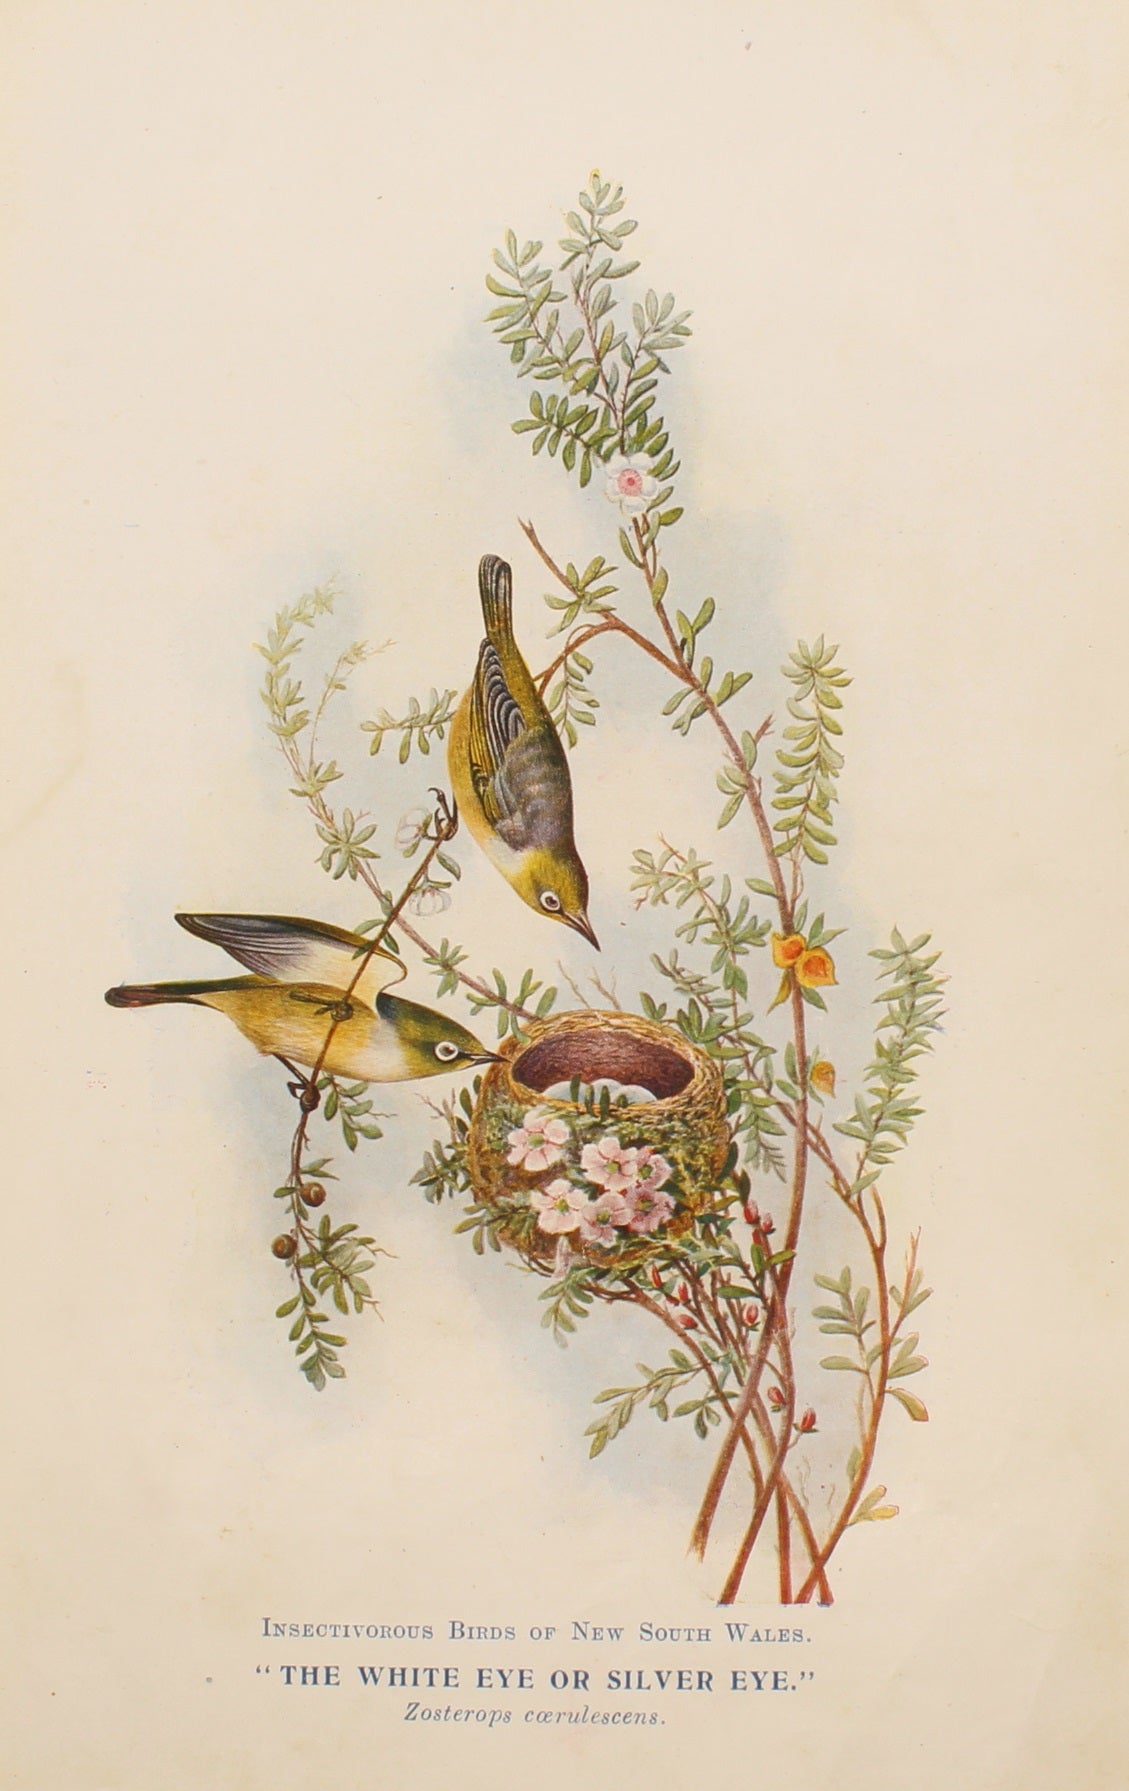 Bird, North Alfred John, The White Eye or Silver Eye, Insectivorous Birds of NSW, 1896